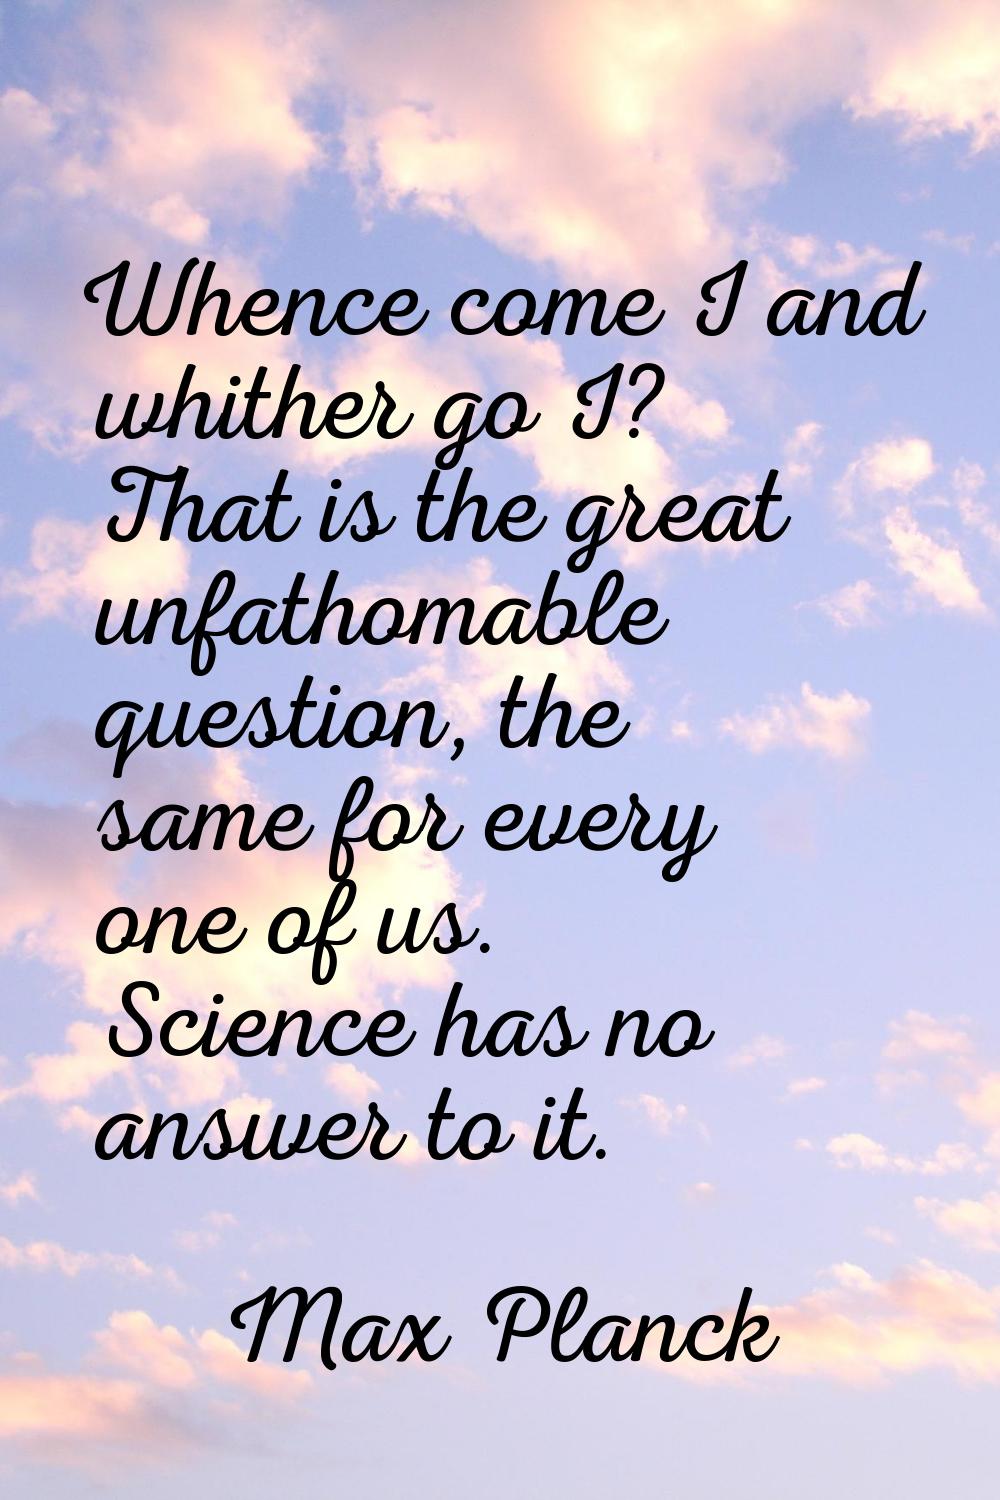 Whence come I and whither go I? That is the great unfathomable question, the same for every one of 